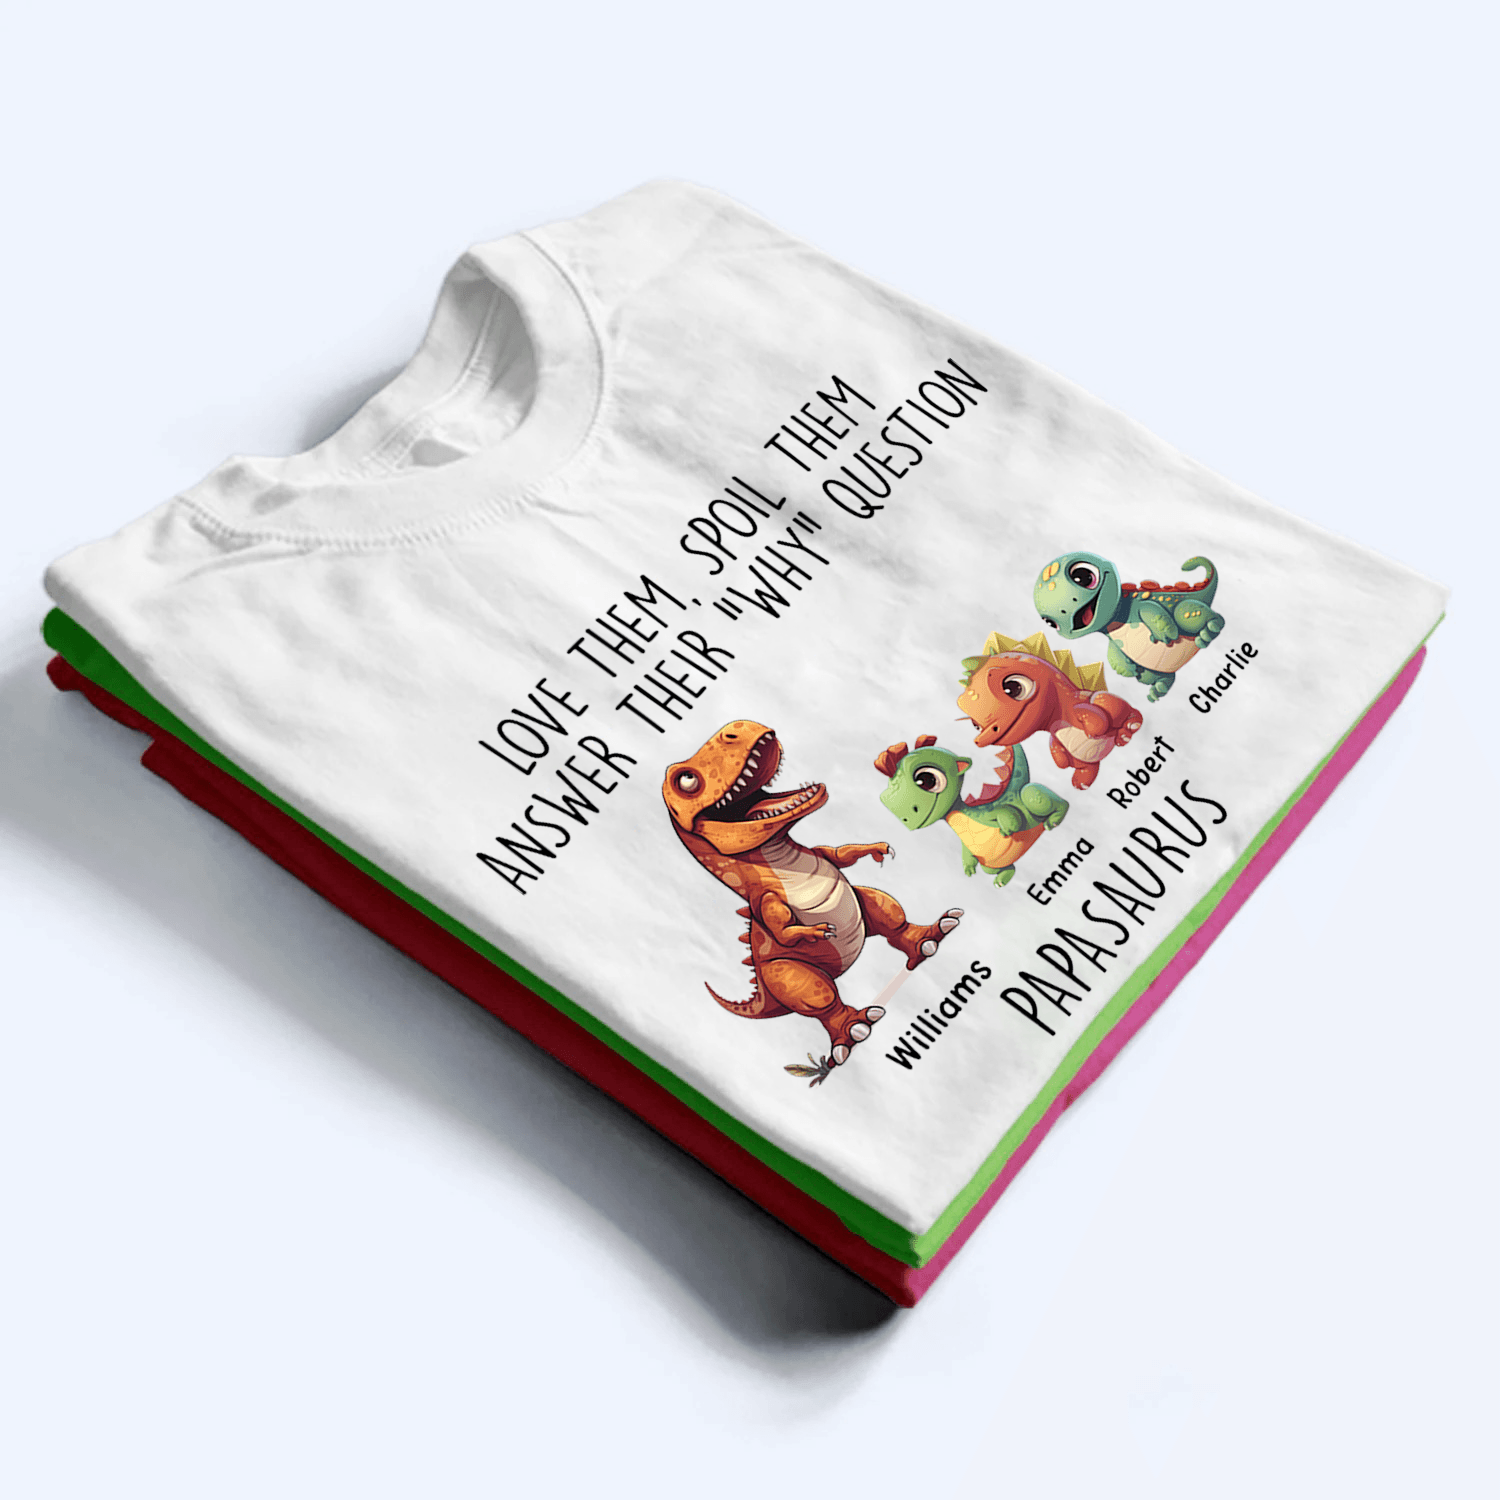 Love Them, Spoil Them Papasaurus - Personalized Custom T Shirt - Father's Day Gift for Dad, Papa, Grandpa, Daddy, Dada - Suzitee Store